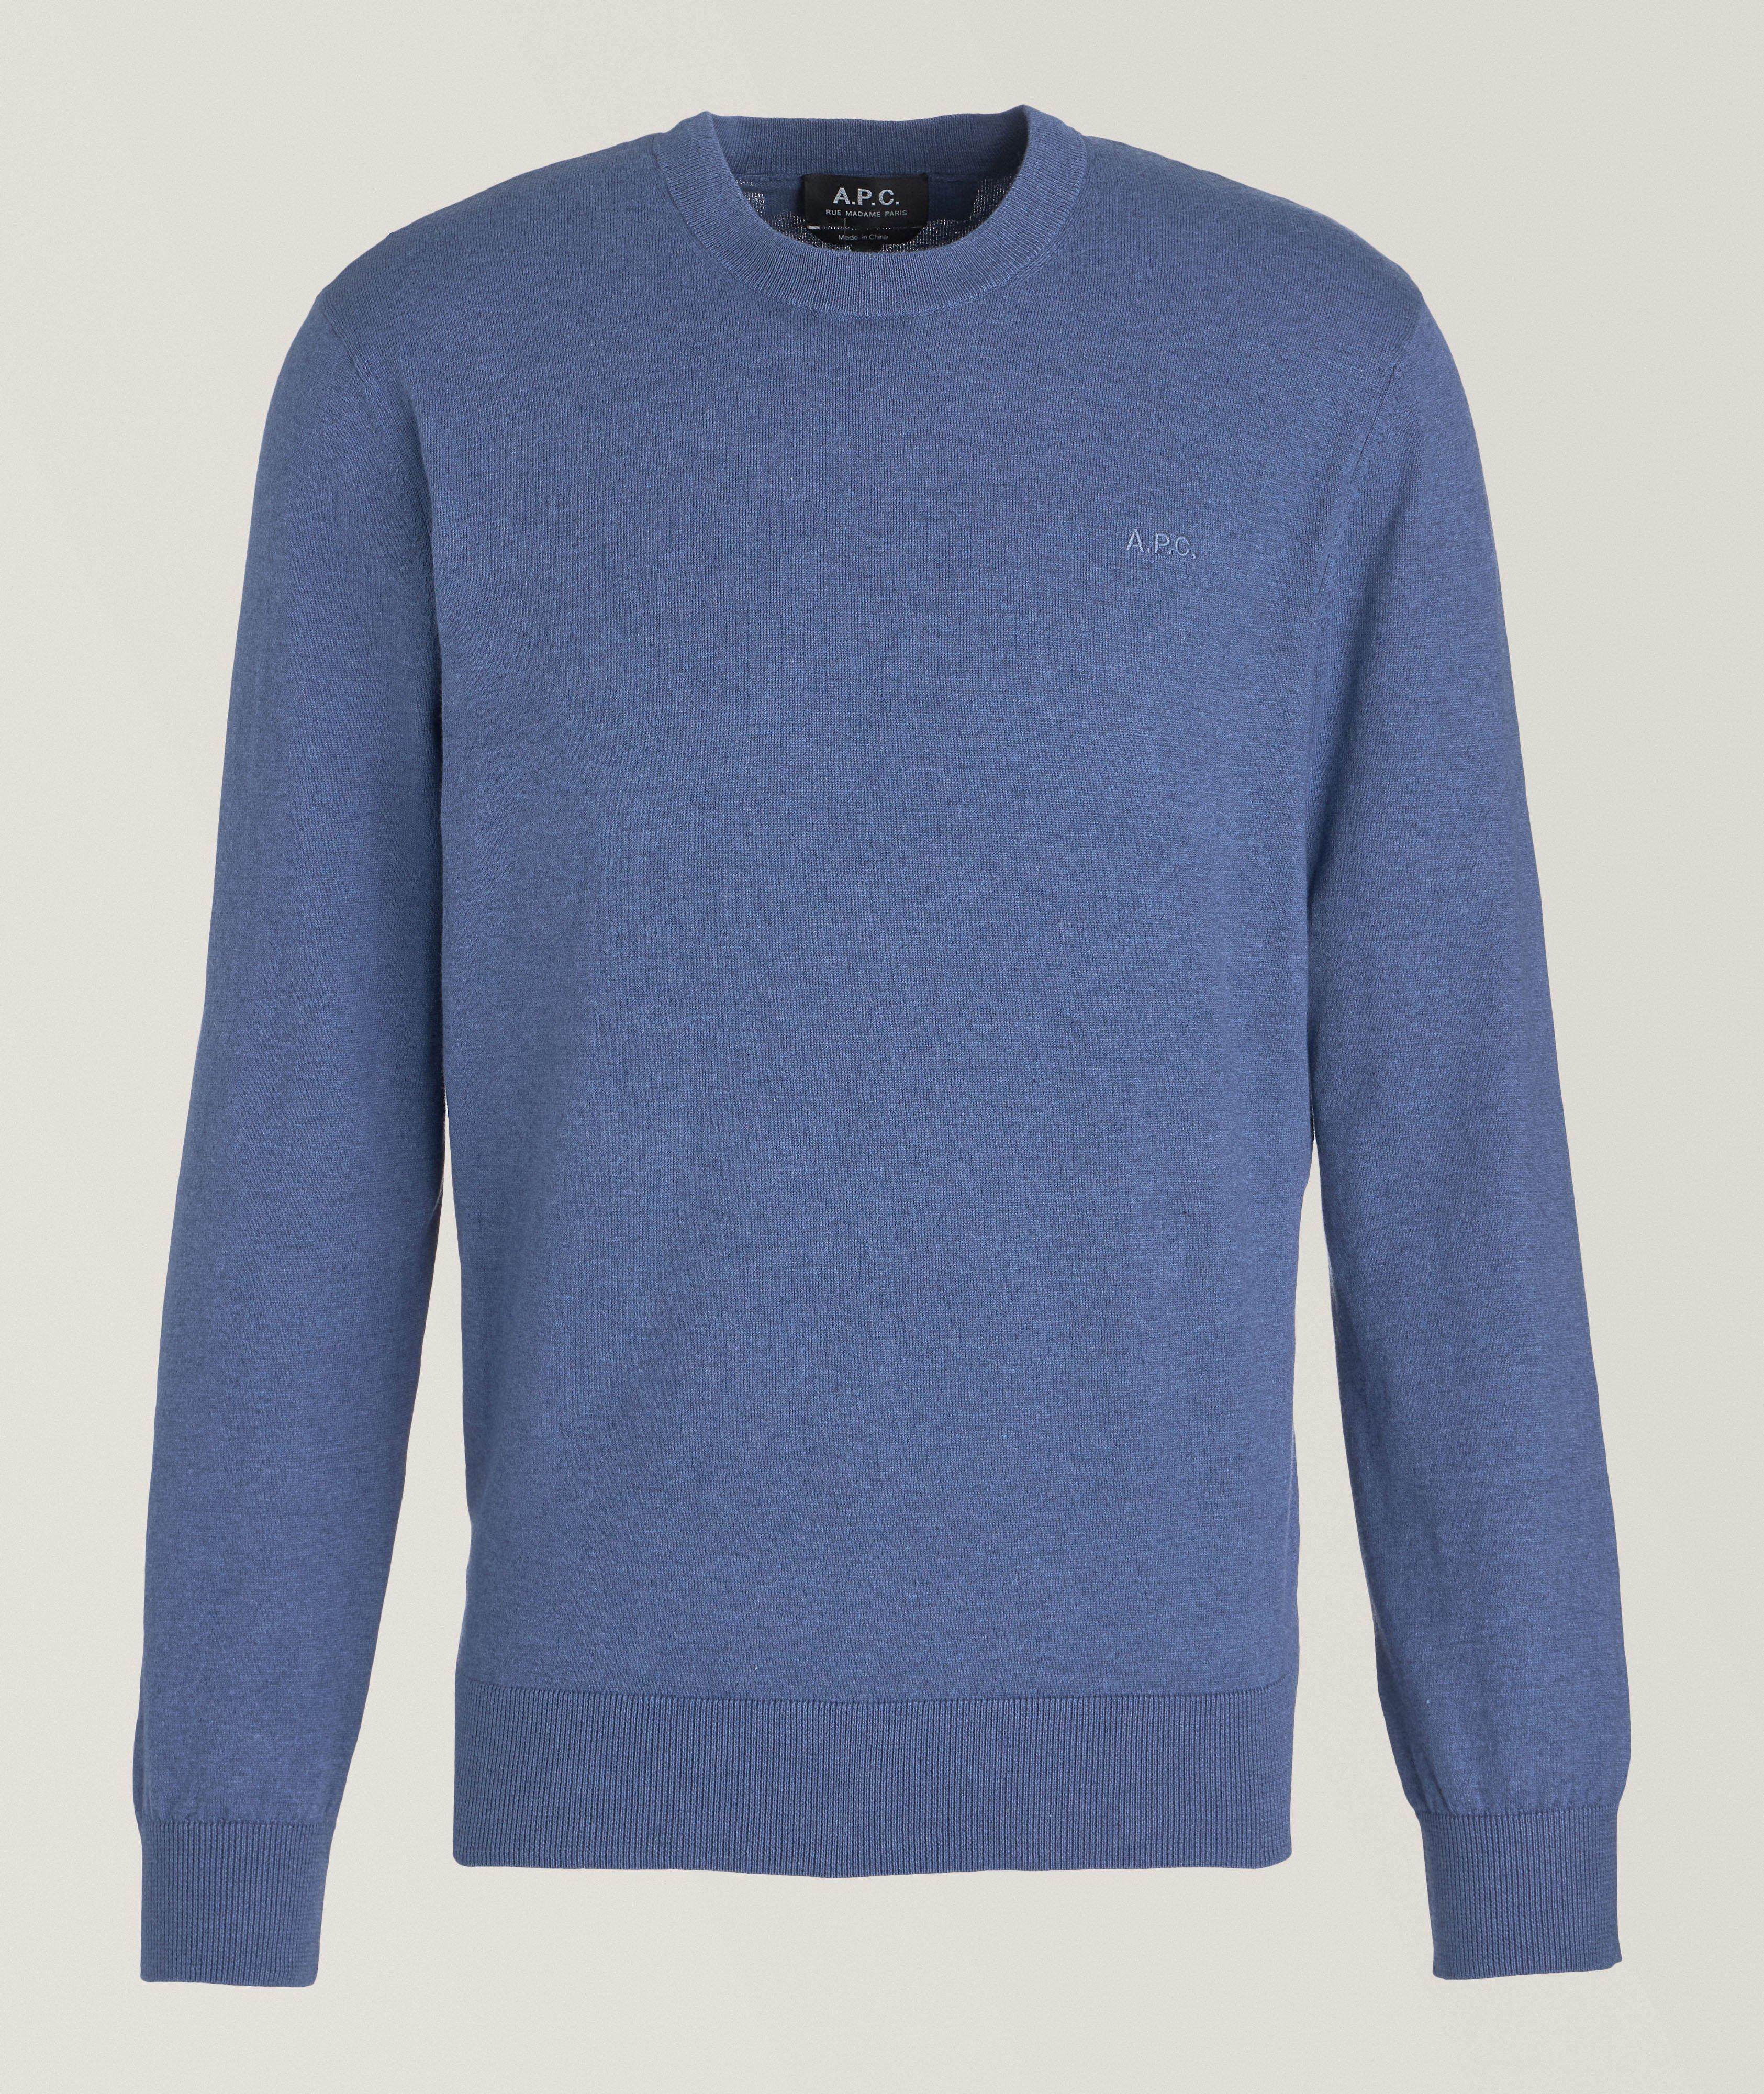 A.P.C. Julo Cotton-Cashmere Knitted Sweater 